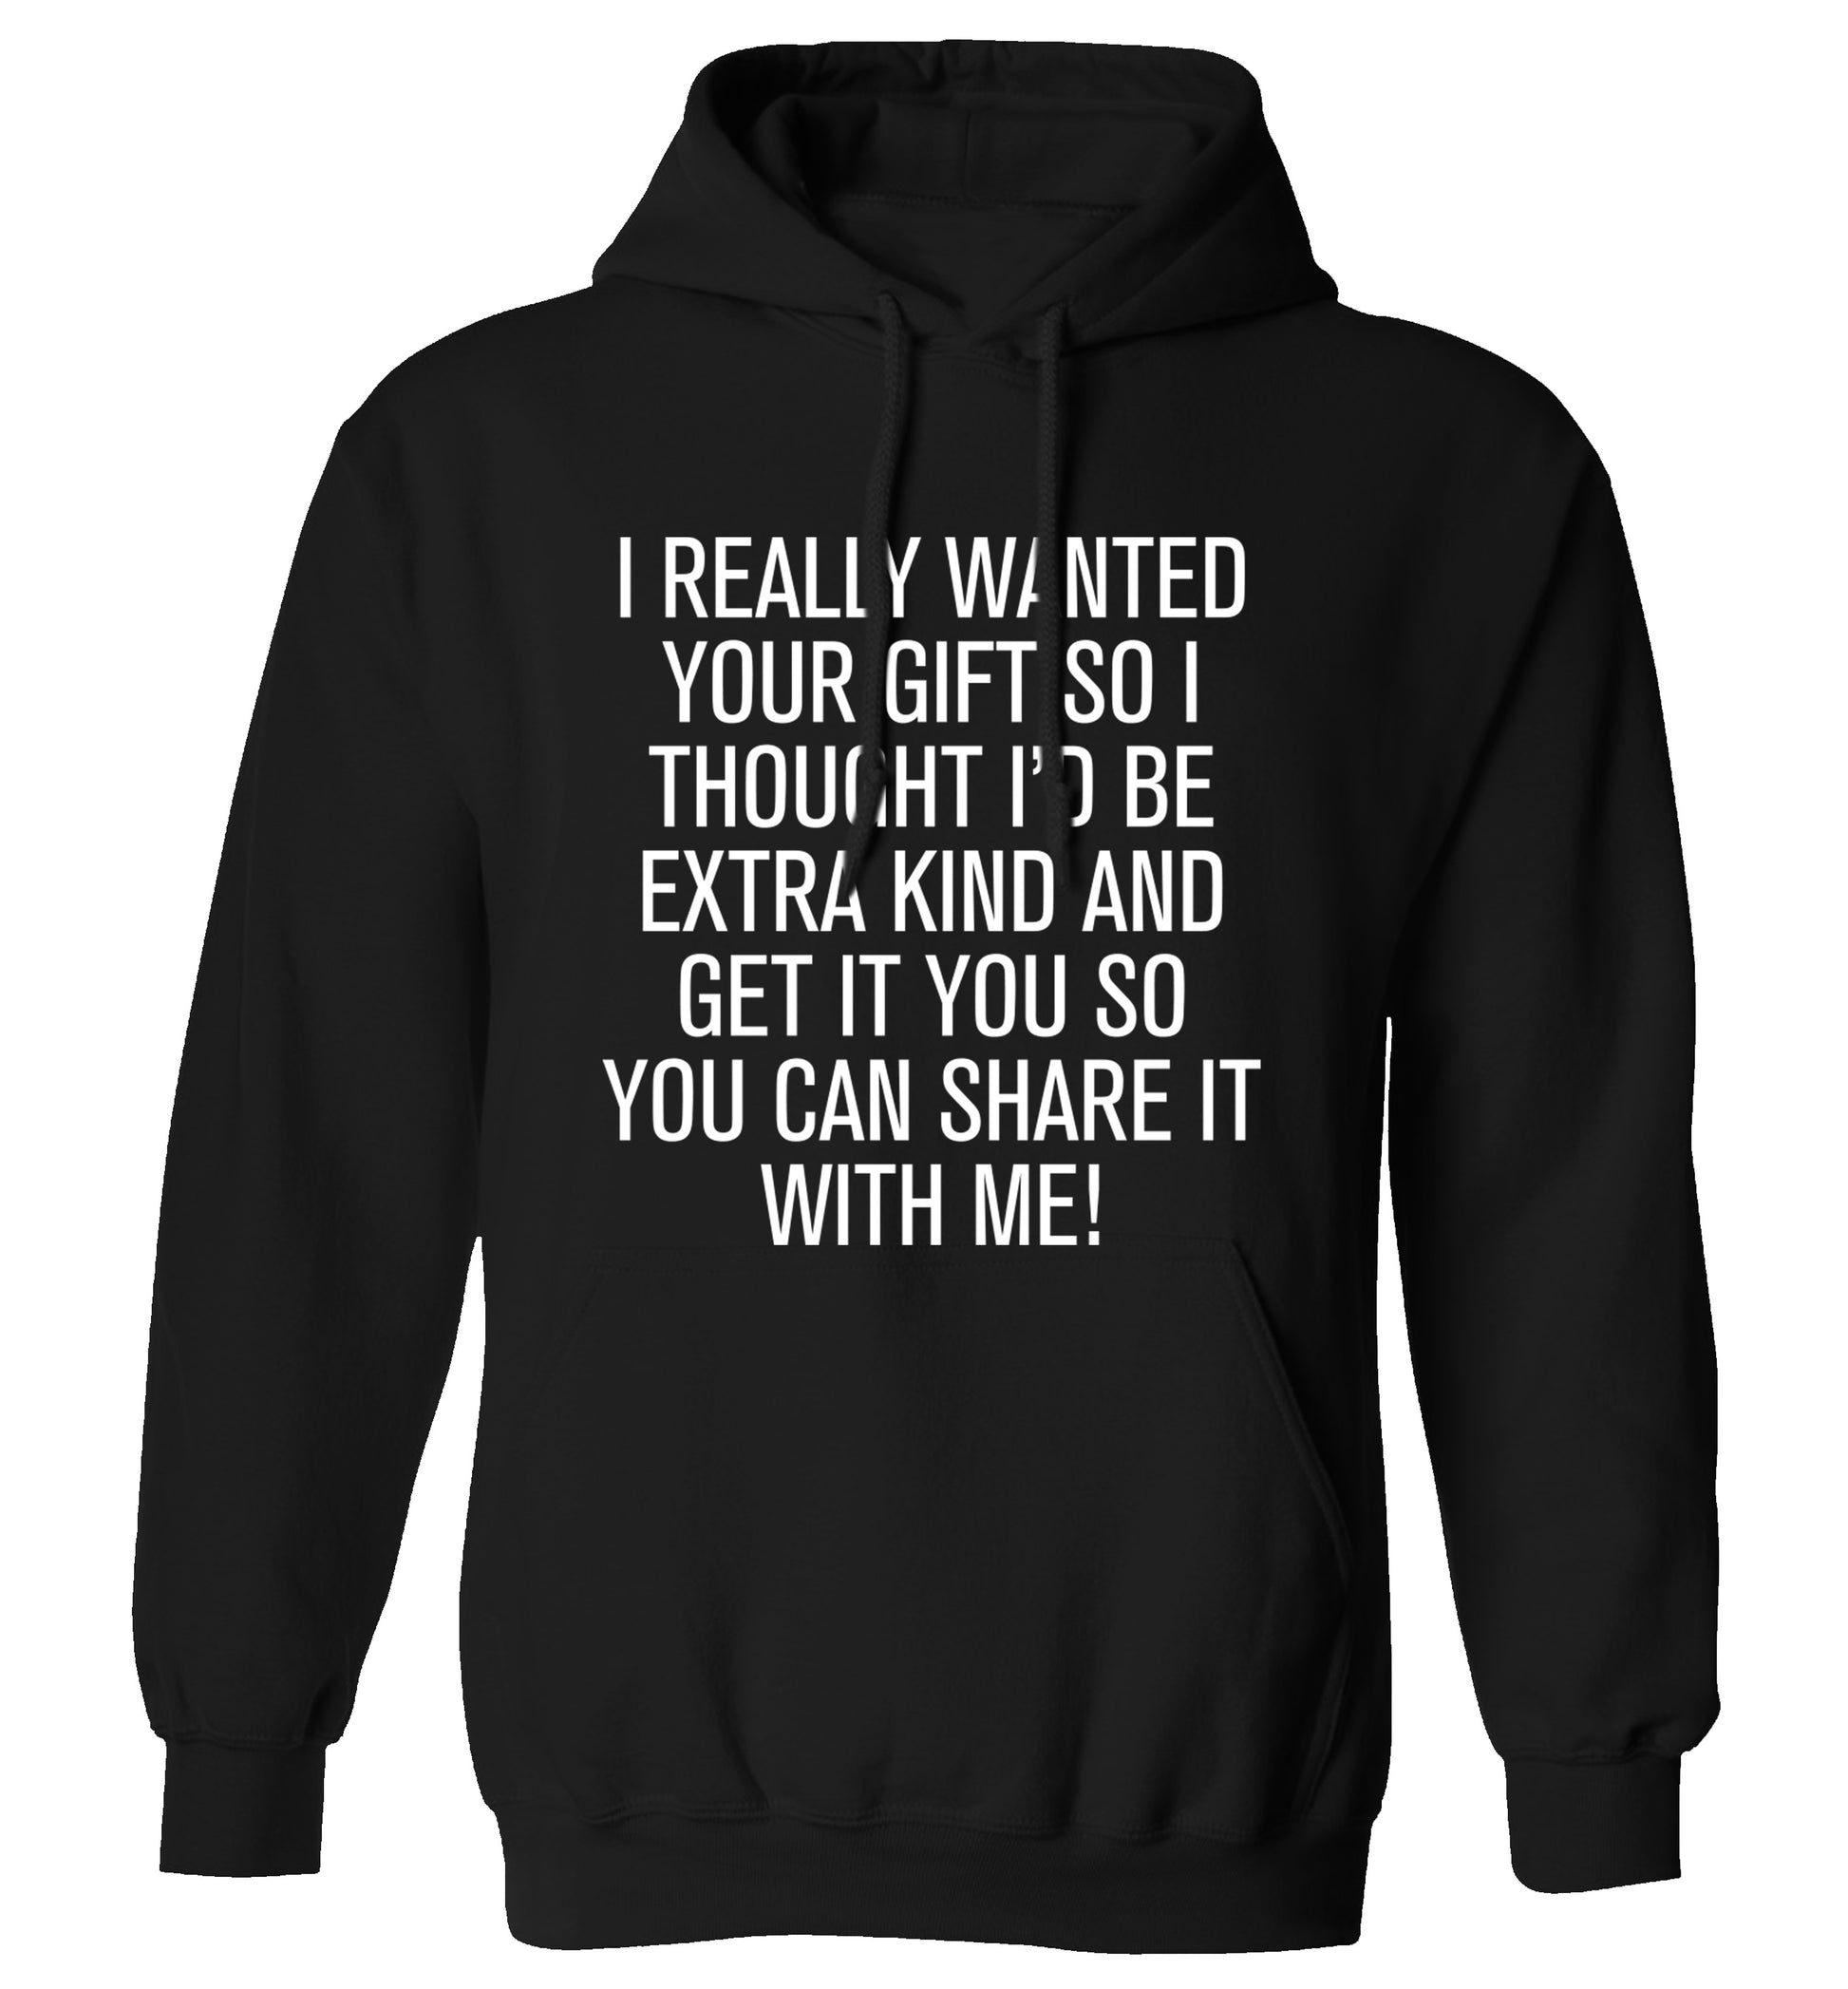 I really wanted your gift adults unisex black hoodie 2XL